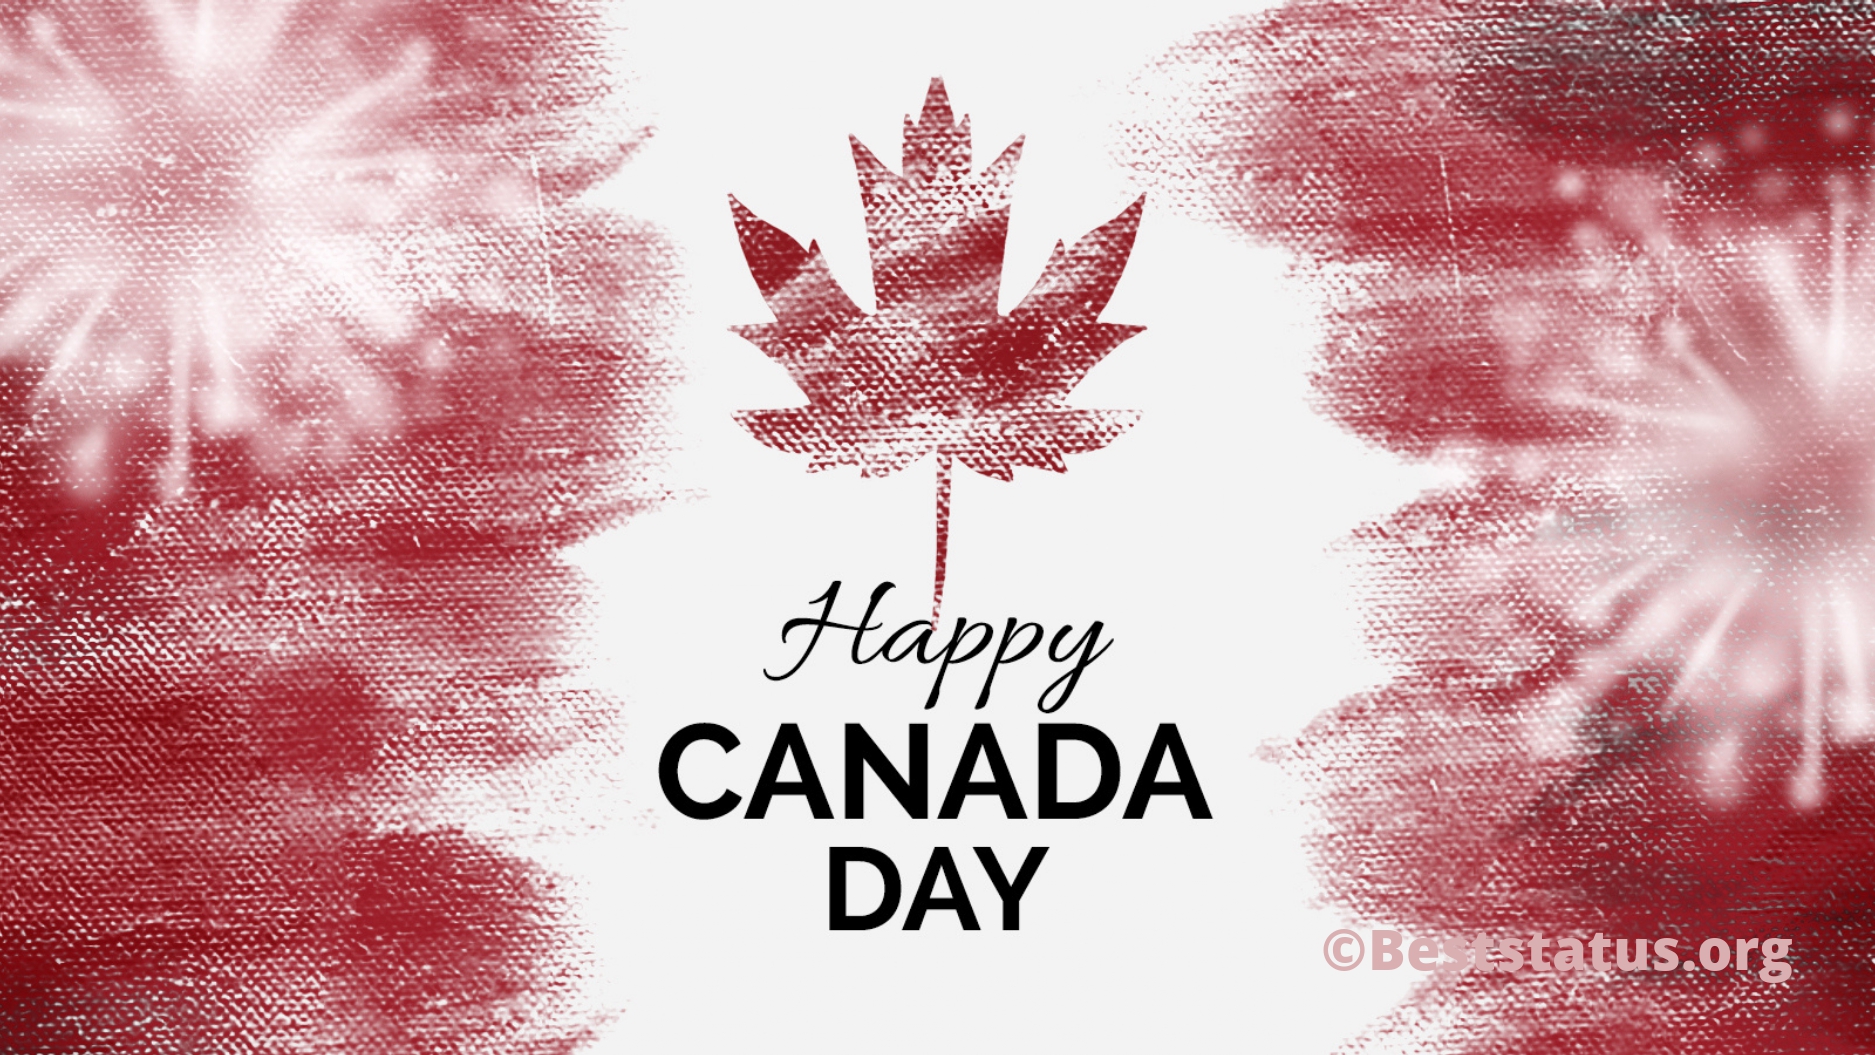 2022 Canada Day: Wishes, Messages, Quotes, Images, And Greetings